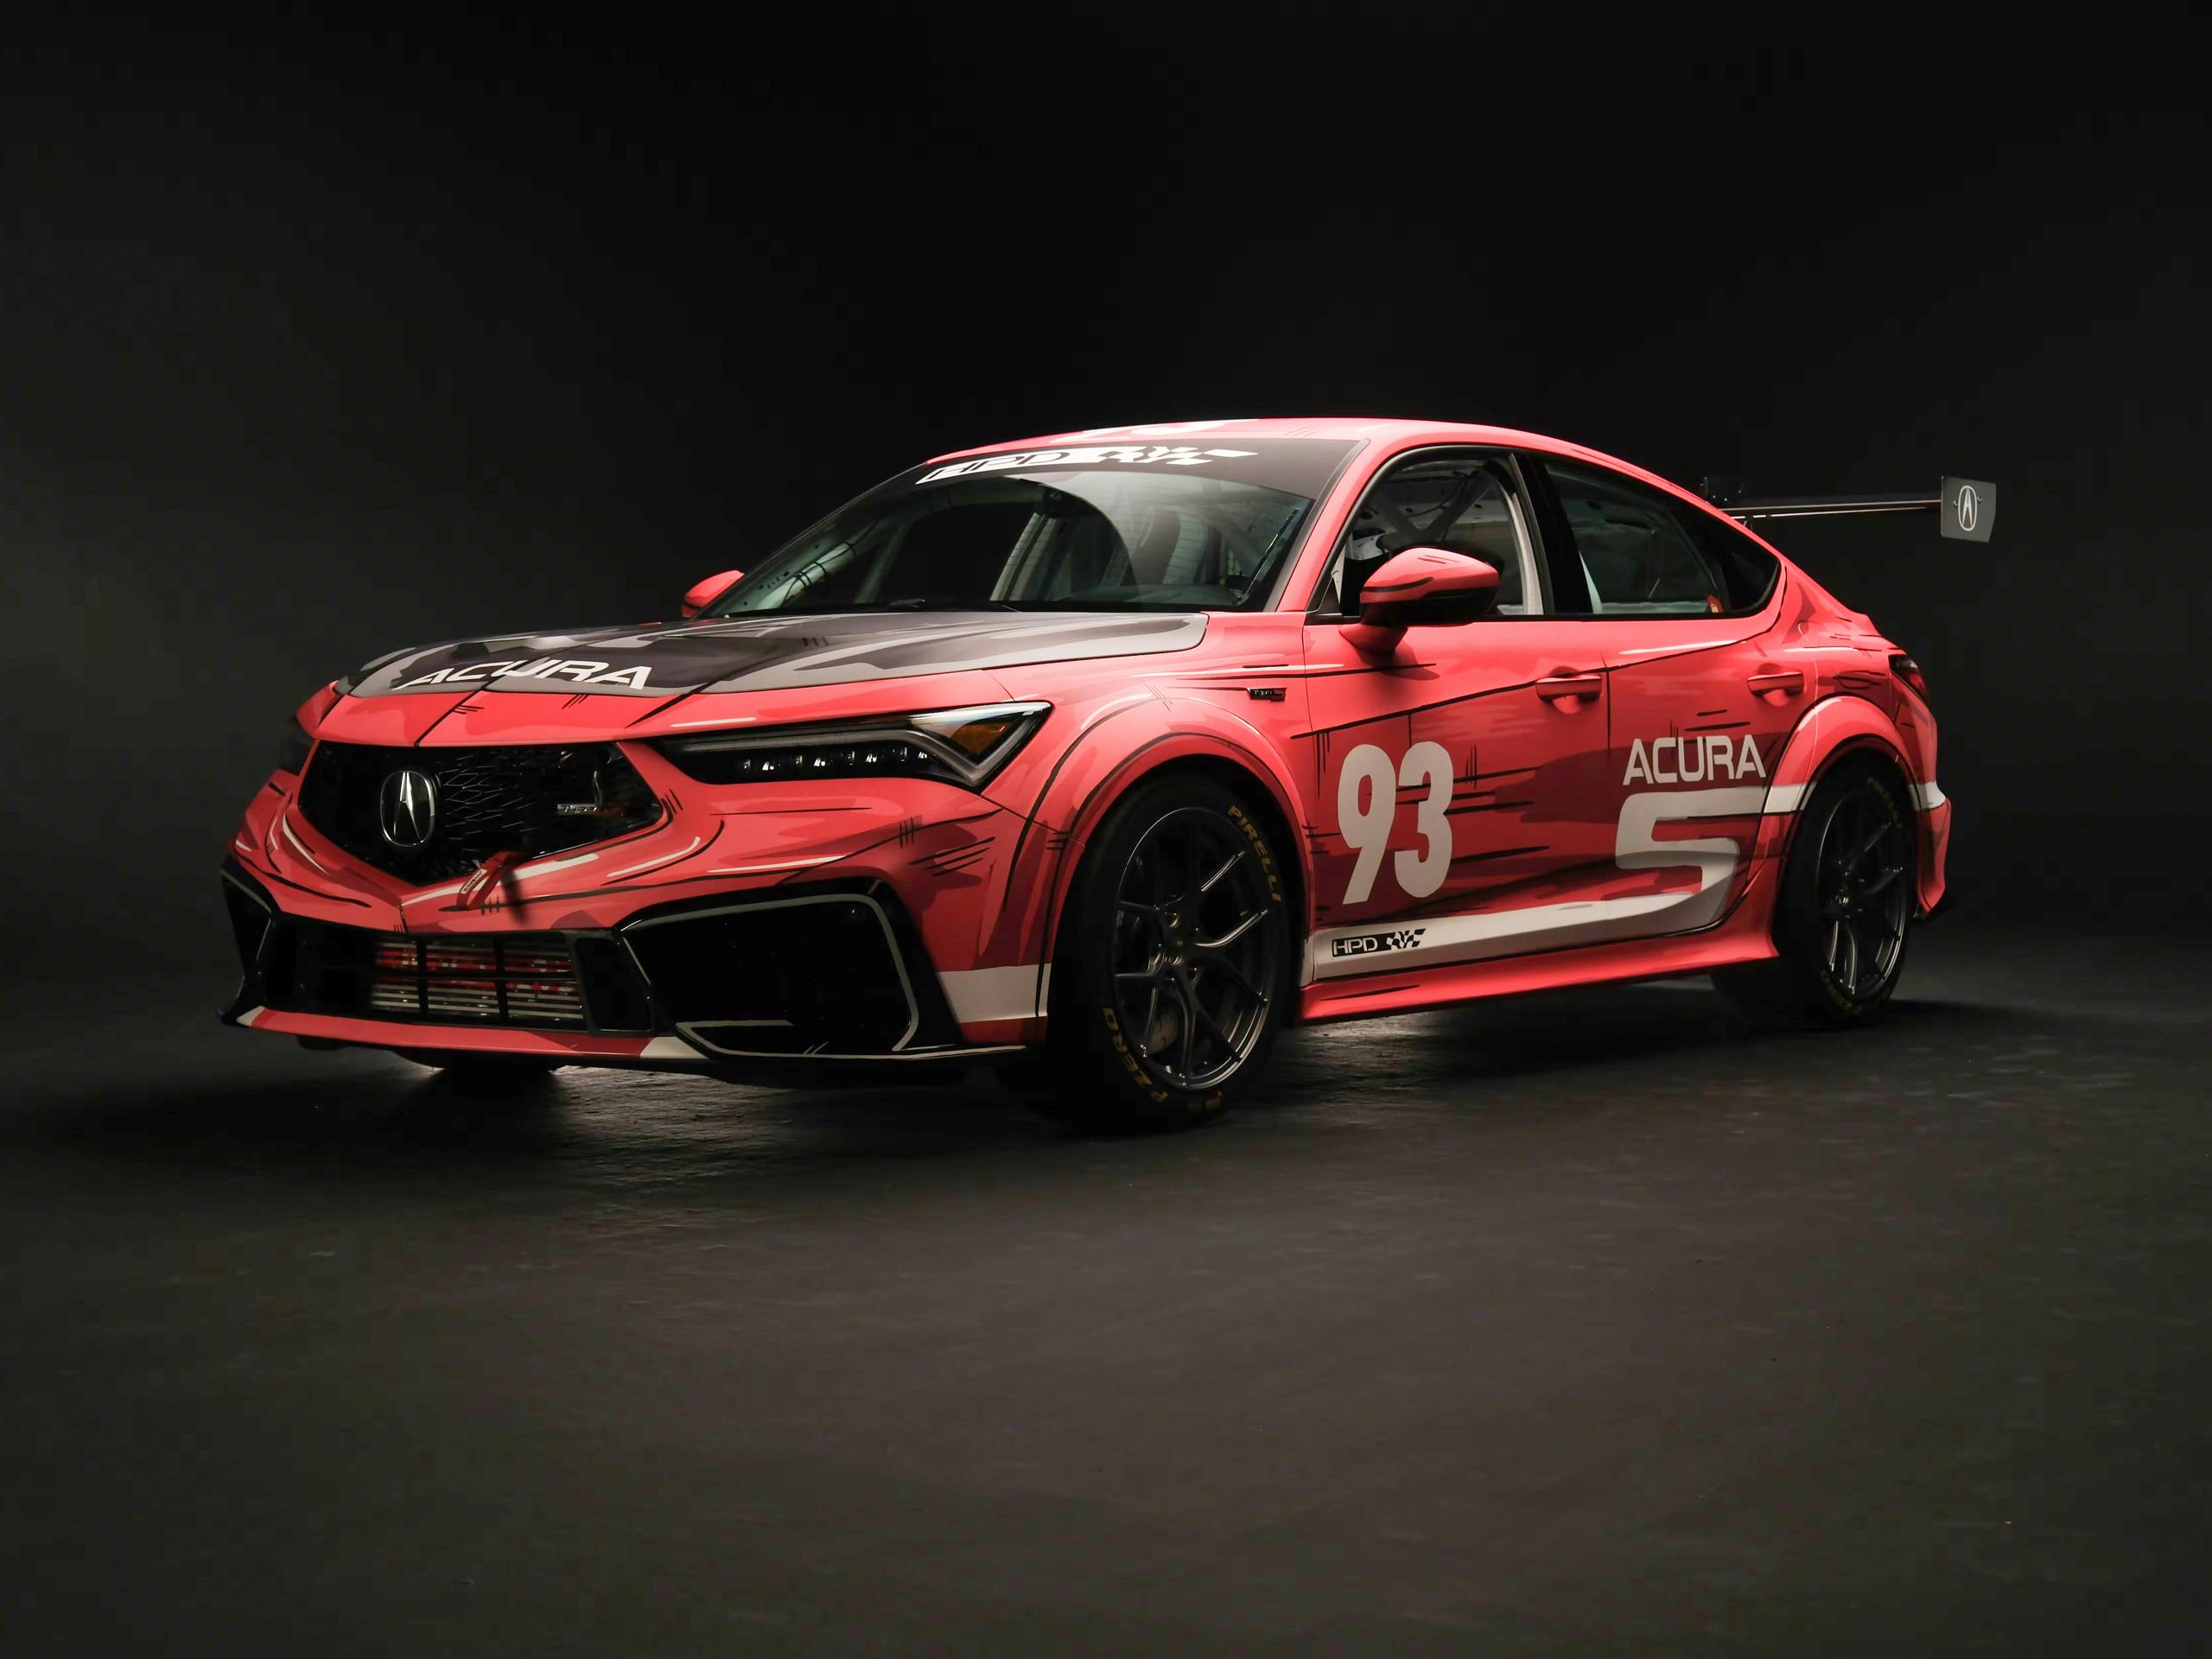 Acura unveils more powerful, $125K Integra race car for 2024 - Hagerty Media